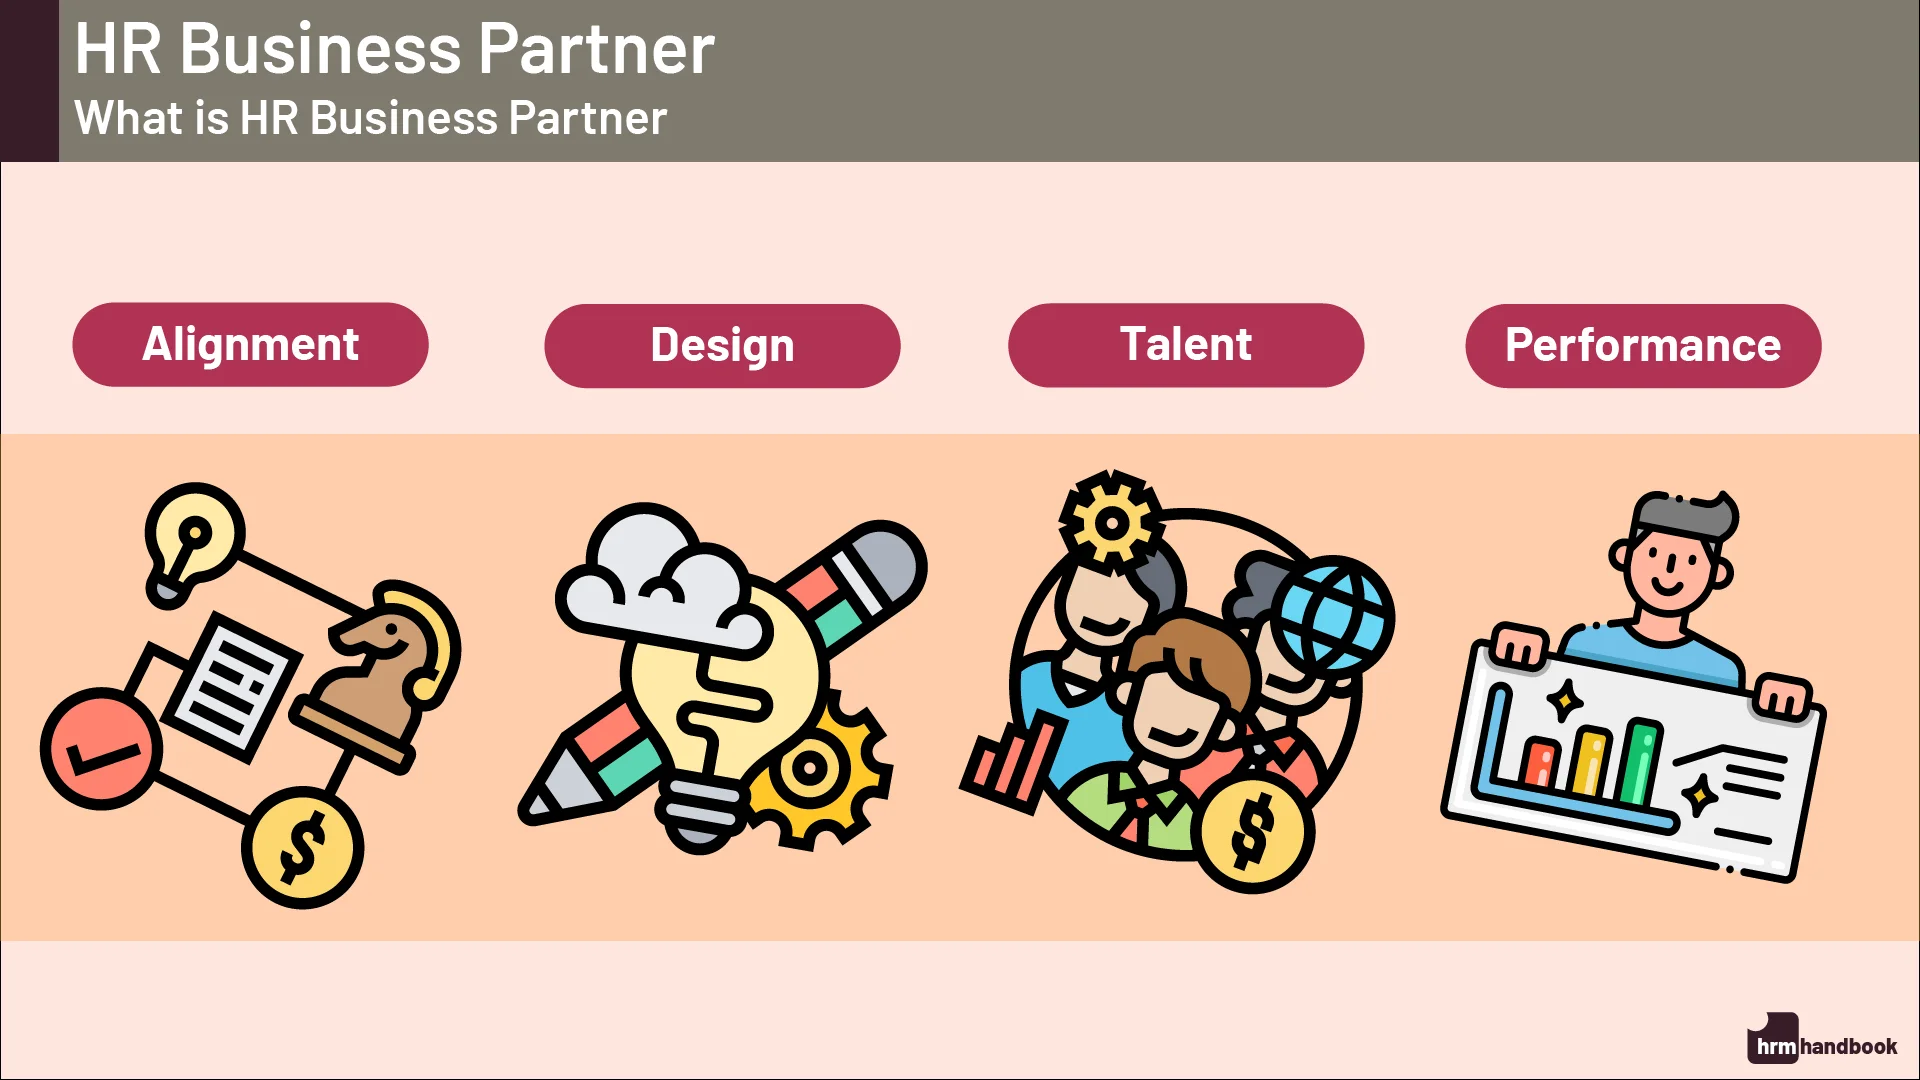 HR Business Partner: What is the role about?